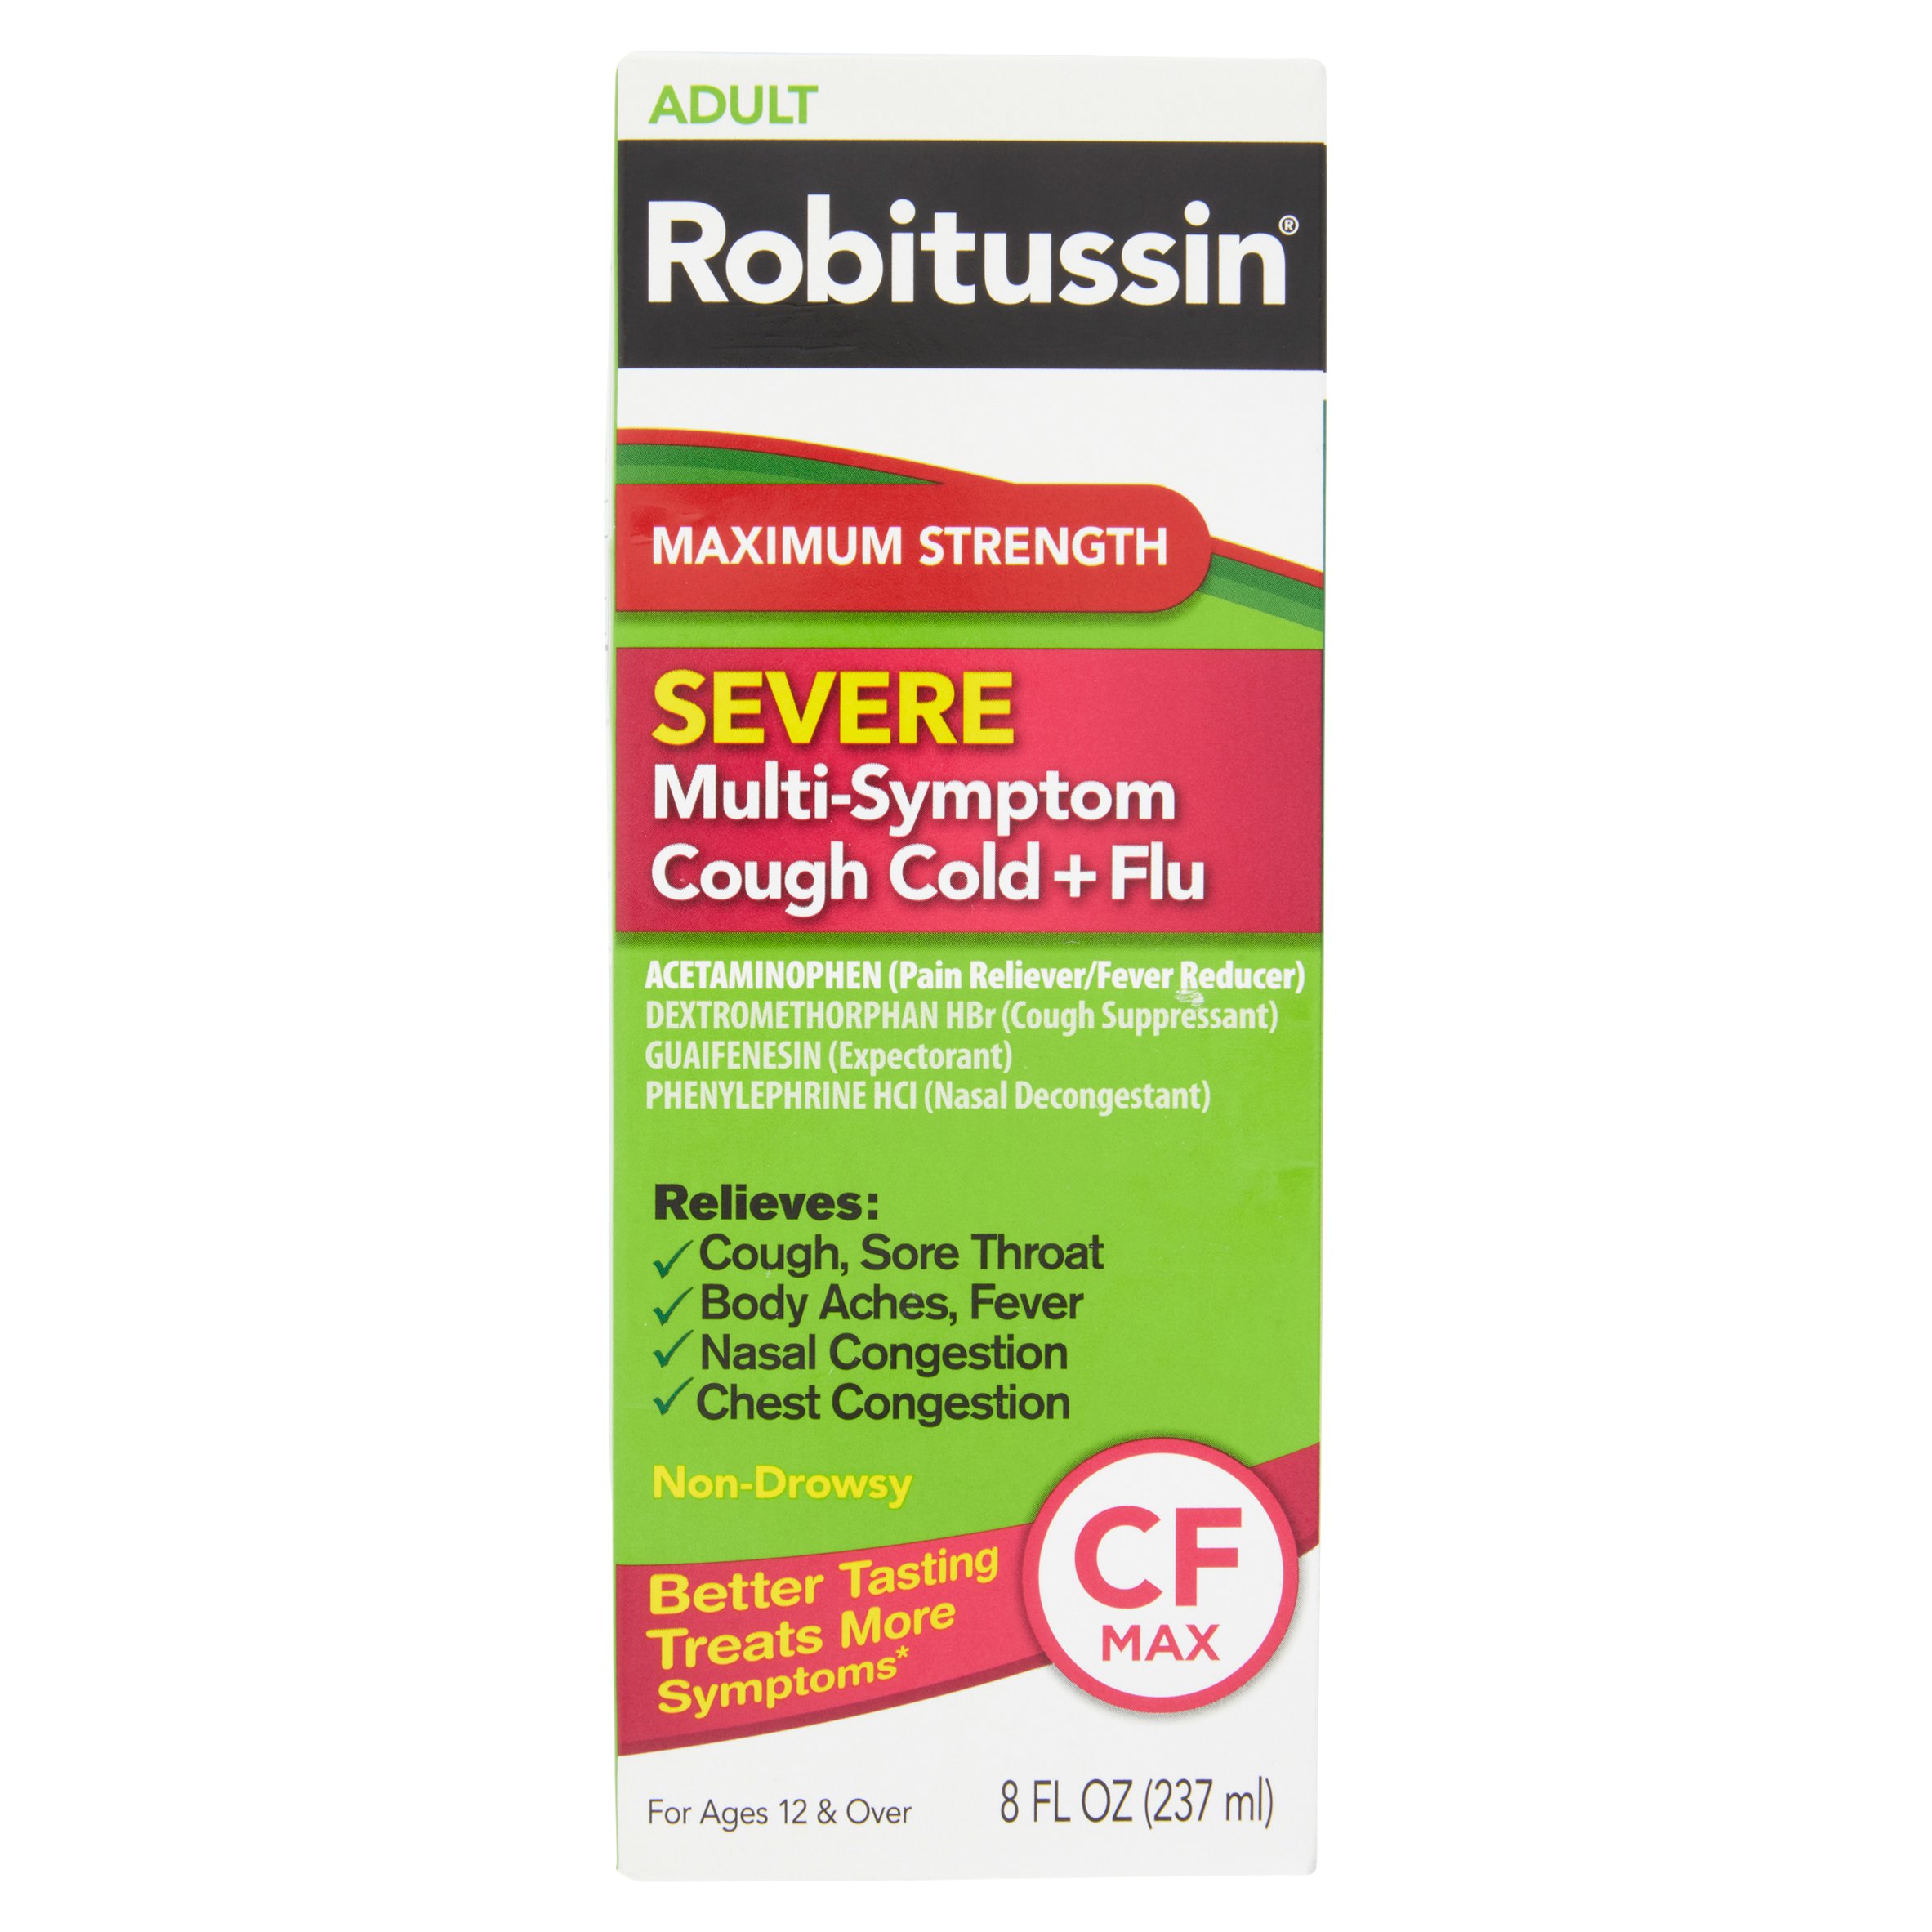 Robitussin Adult Max Strength Severe Cough Cold and Flu Medicine, 8 Fl Oz - image 3 of 5